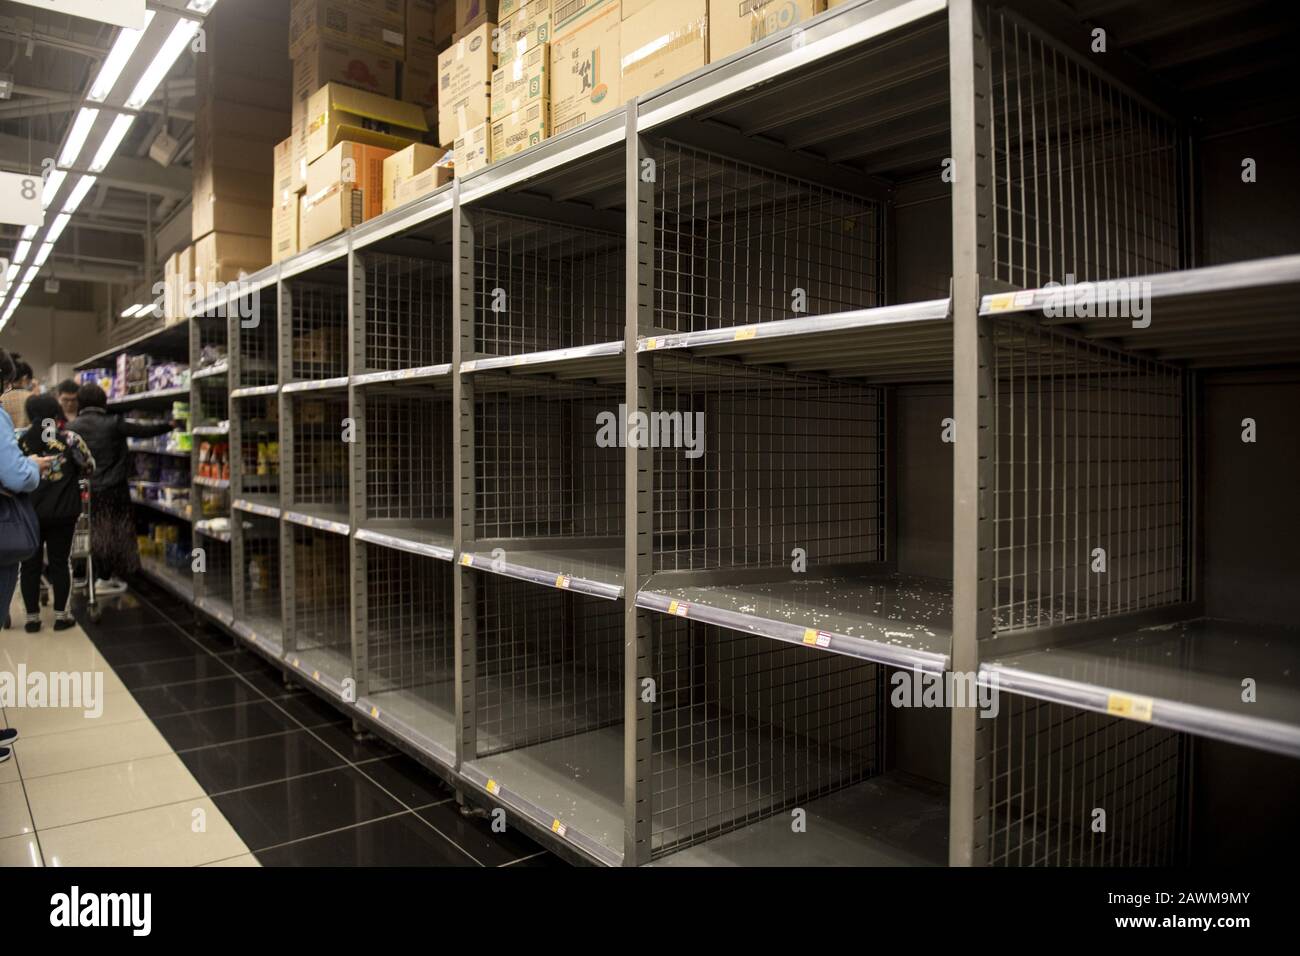 February 9, 2020, Hong Kong, China: 2019-nCov causes panic buying in Hong Kong. Internet and social media rumors fuel panic buying with rice and toilet paper top of the list. Fortress Hill Wellcome supermarket shows empty rice shelves. The government has reassured the public there is no risk to the supply chain but few are listening. (Credit Image: © Jayne Russell/ZUMA Wire) Stock Photo